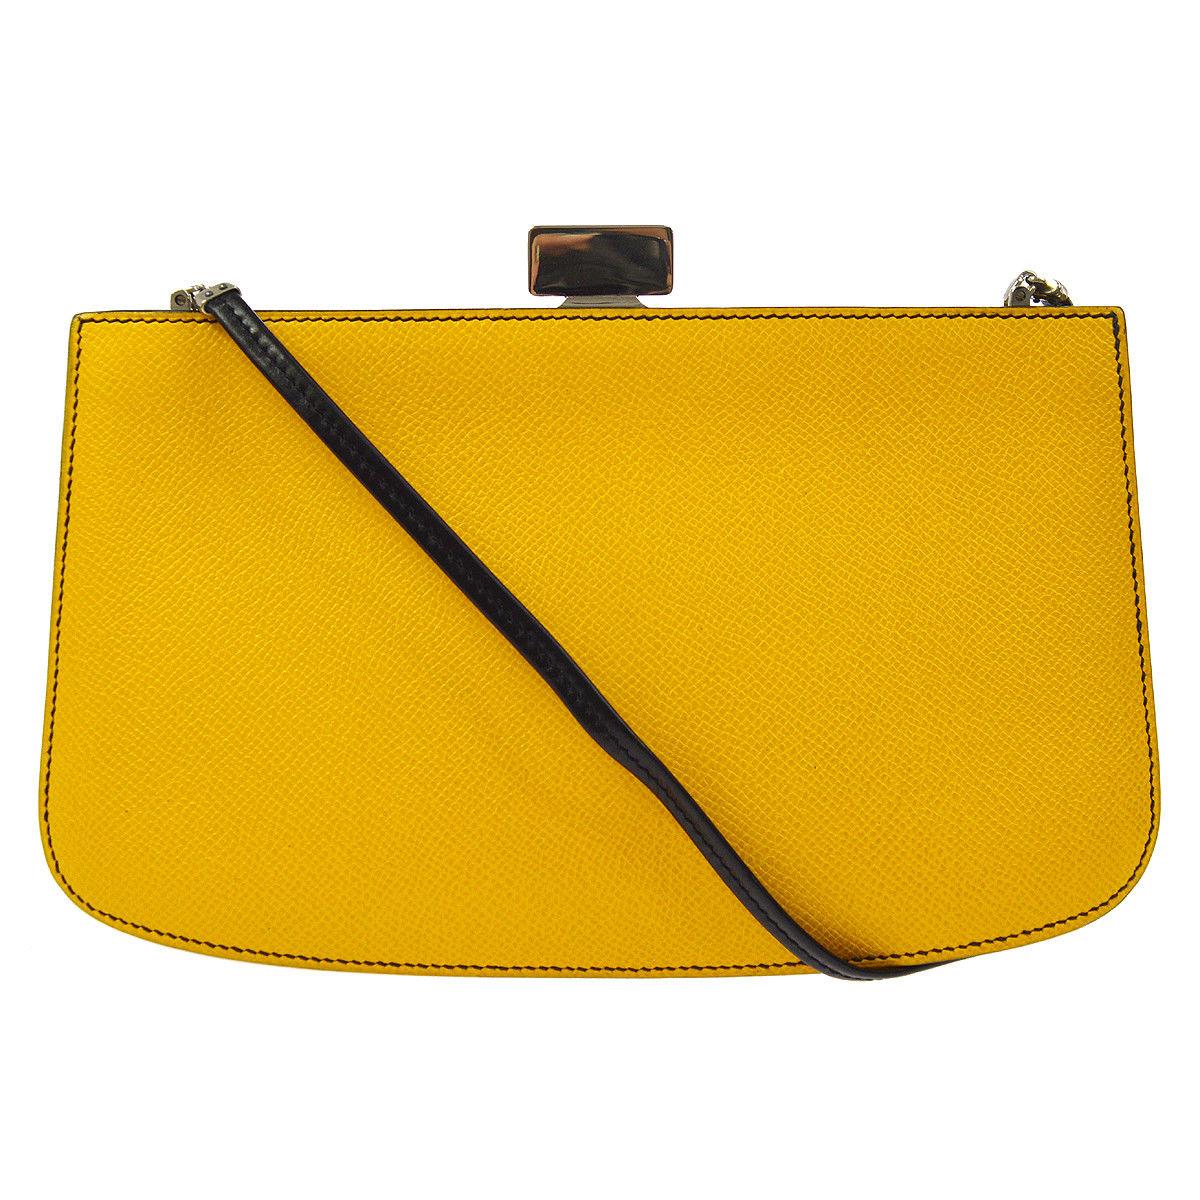 Women's Hermes Rare Leather Yellow Black Taxi 2 in 1 Evening Clutch Shoulder Bag